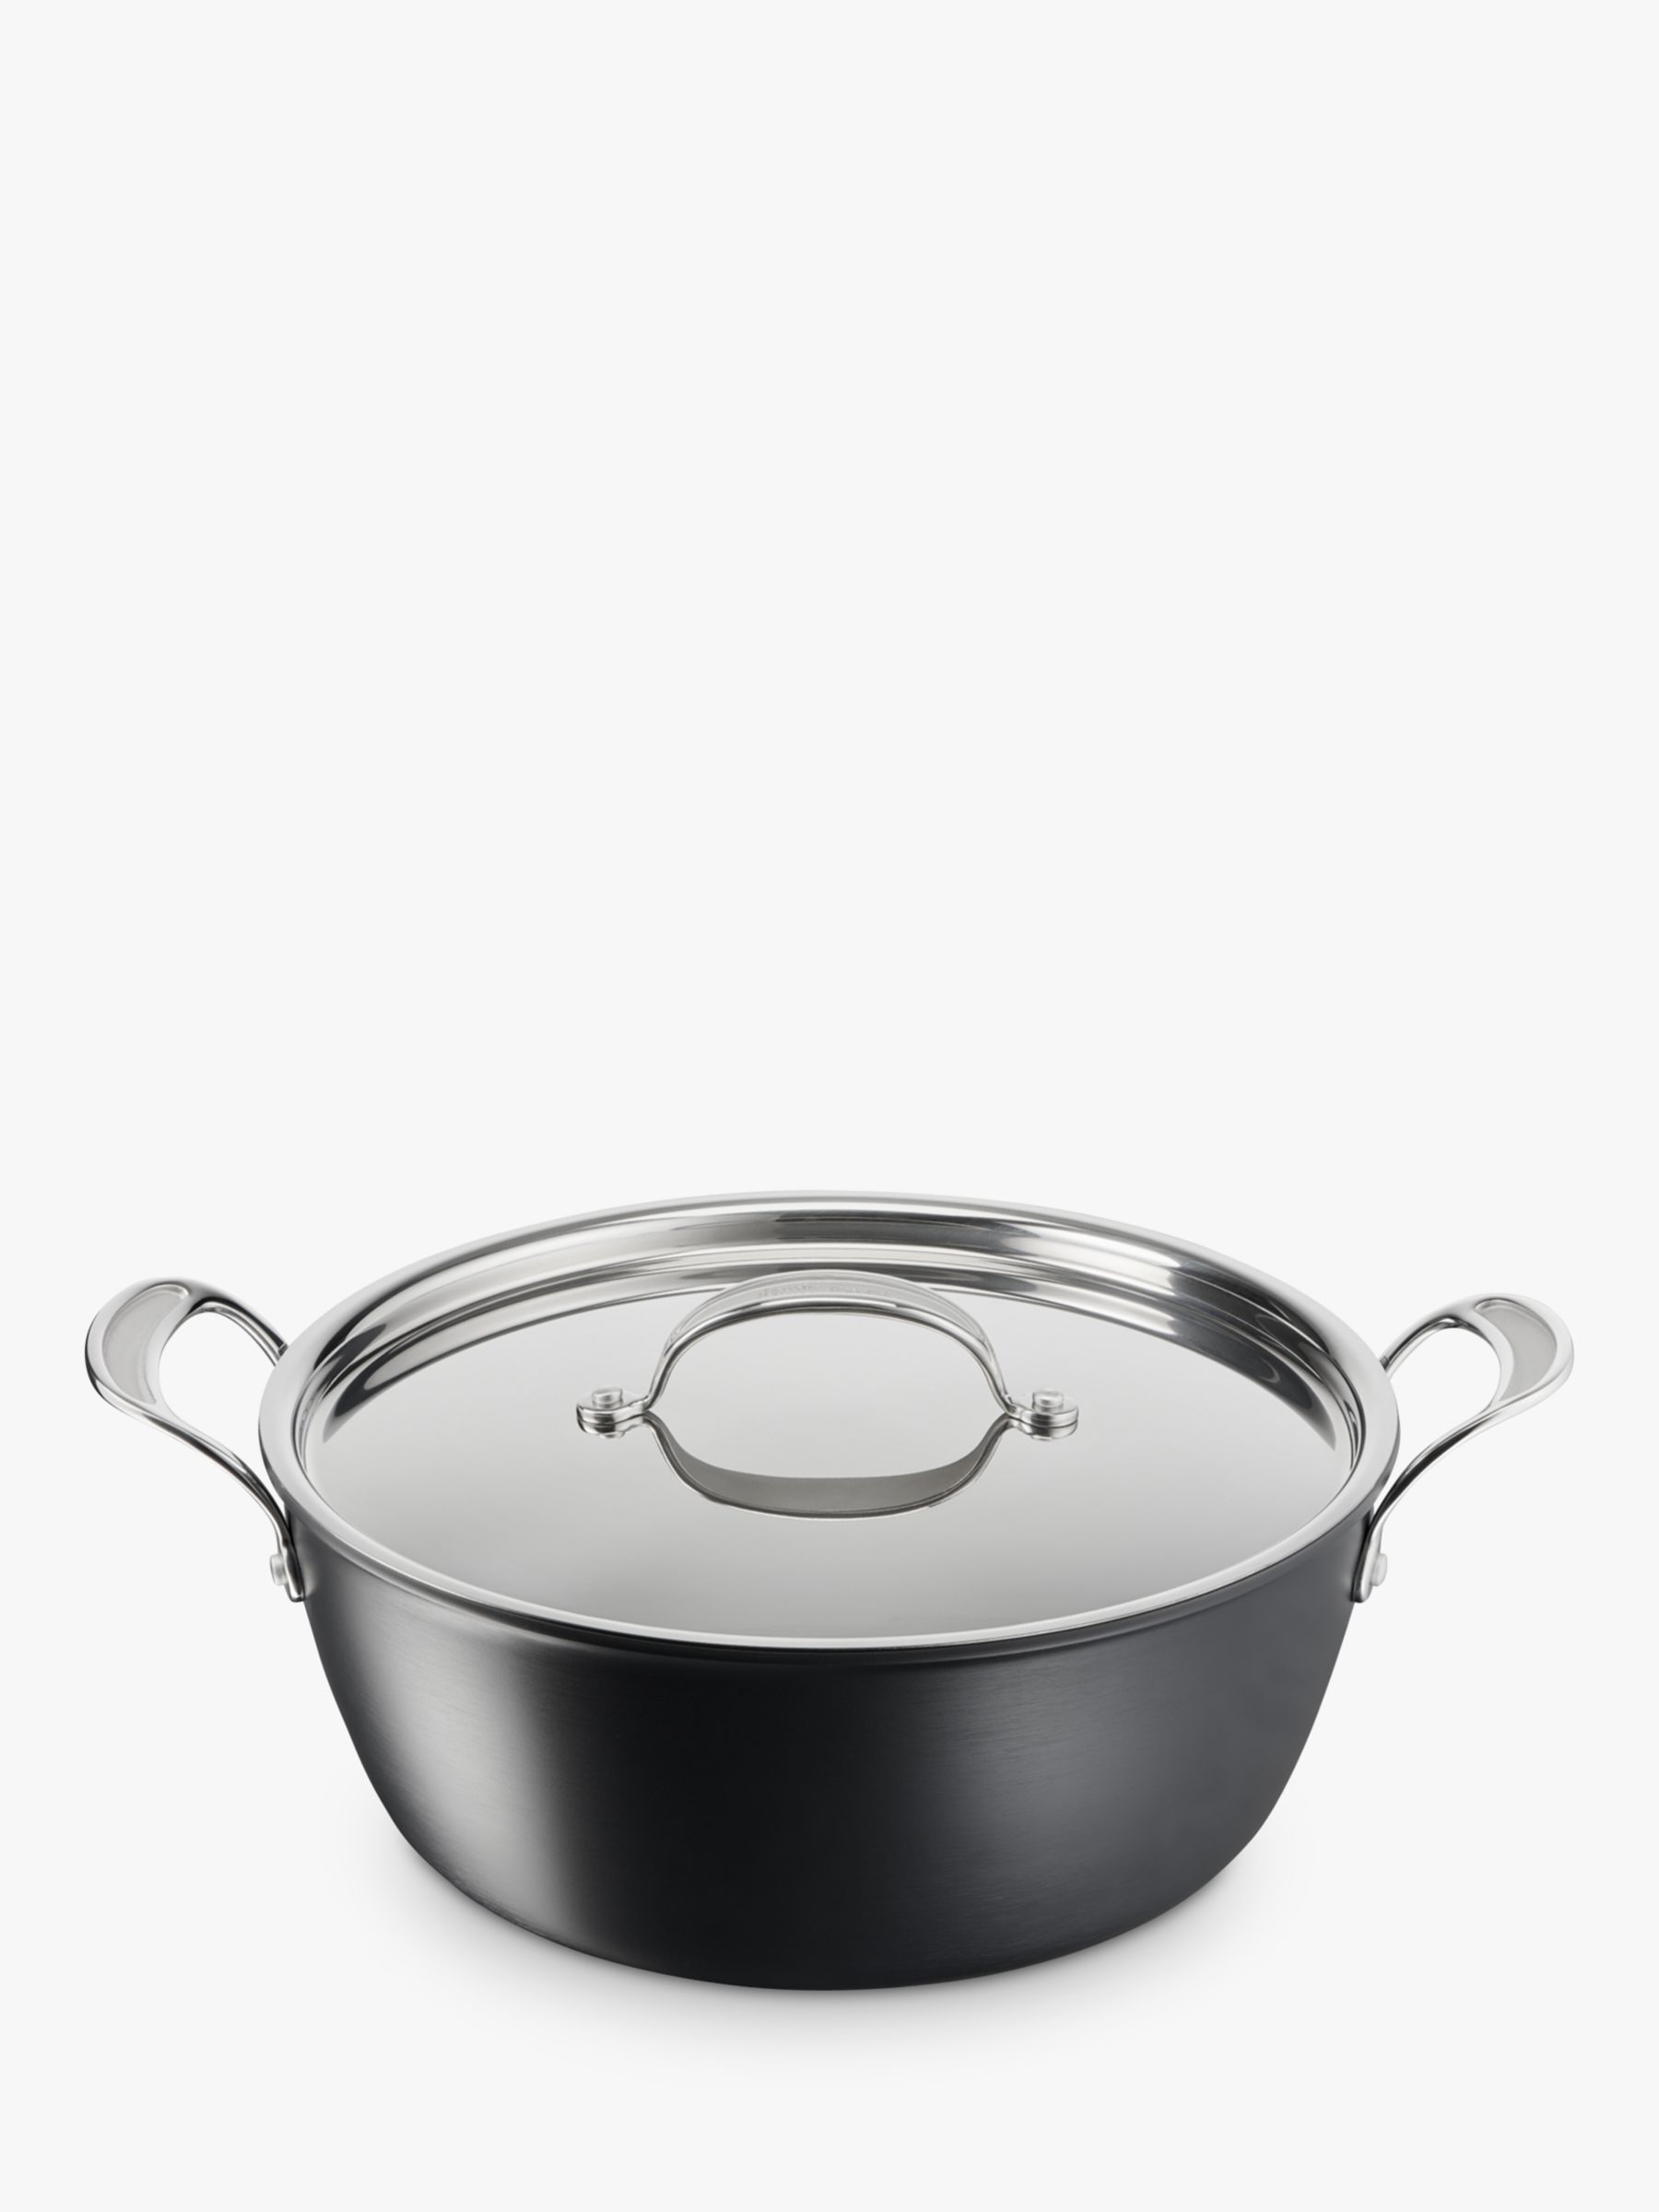 Tefal Jamie Oliver Cooks Classic Induction Non-Stick Hard Anodised